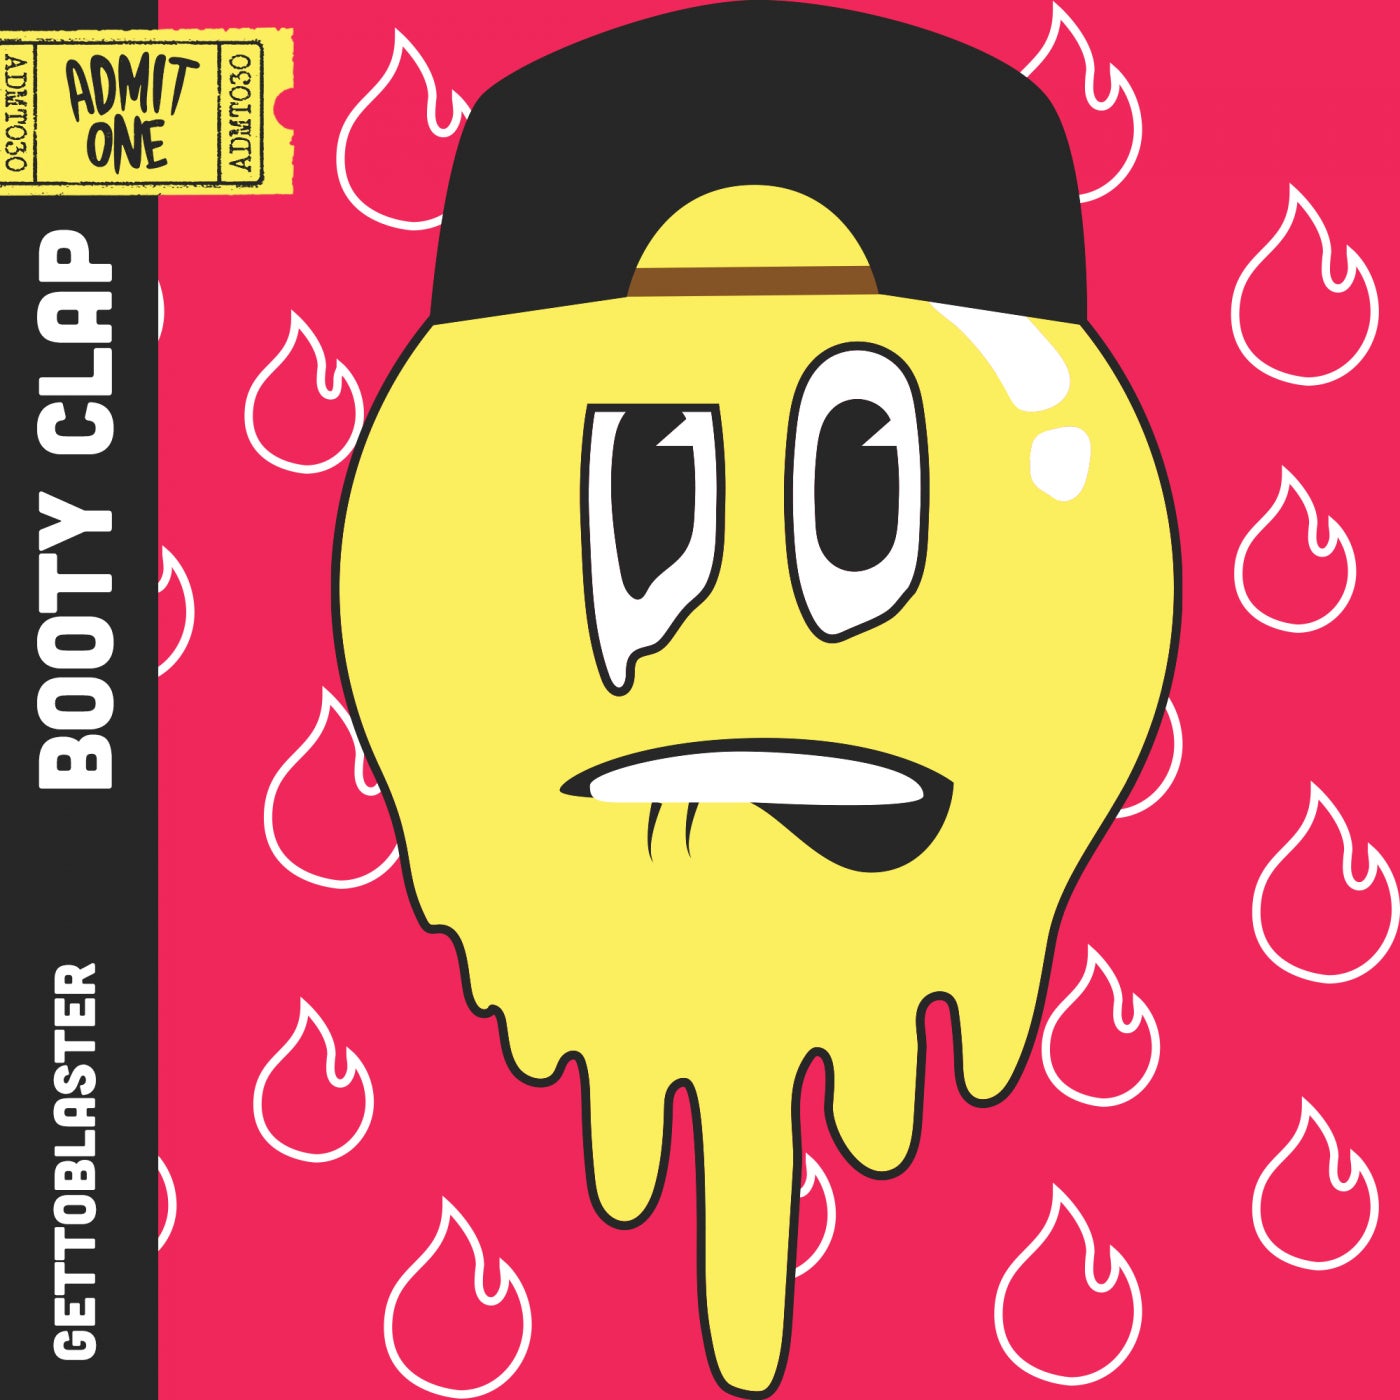 Booty Clap from Admit One Records on Beatport